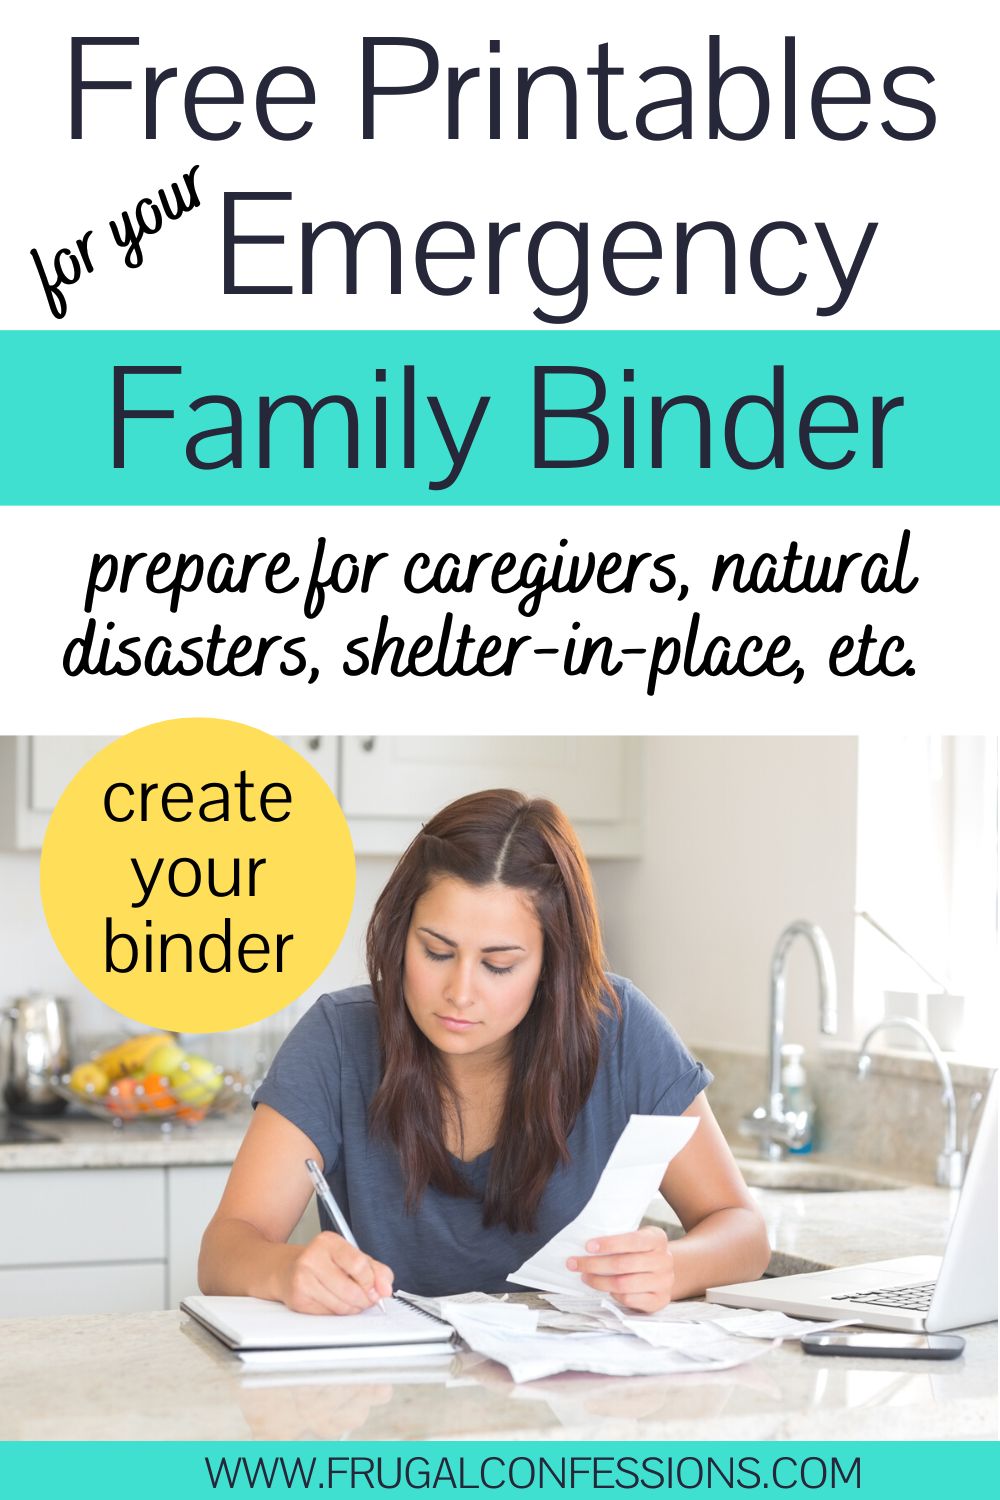 woman in blue shirt working on papers, text overlay "Free Printables for your emergency family binder"